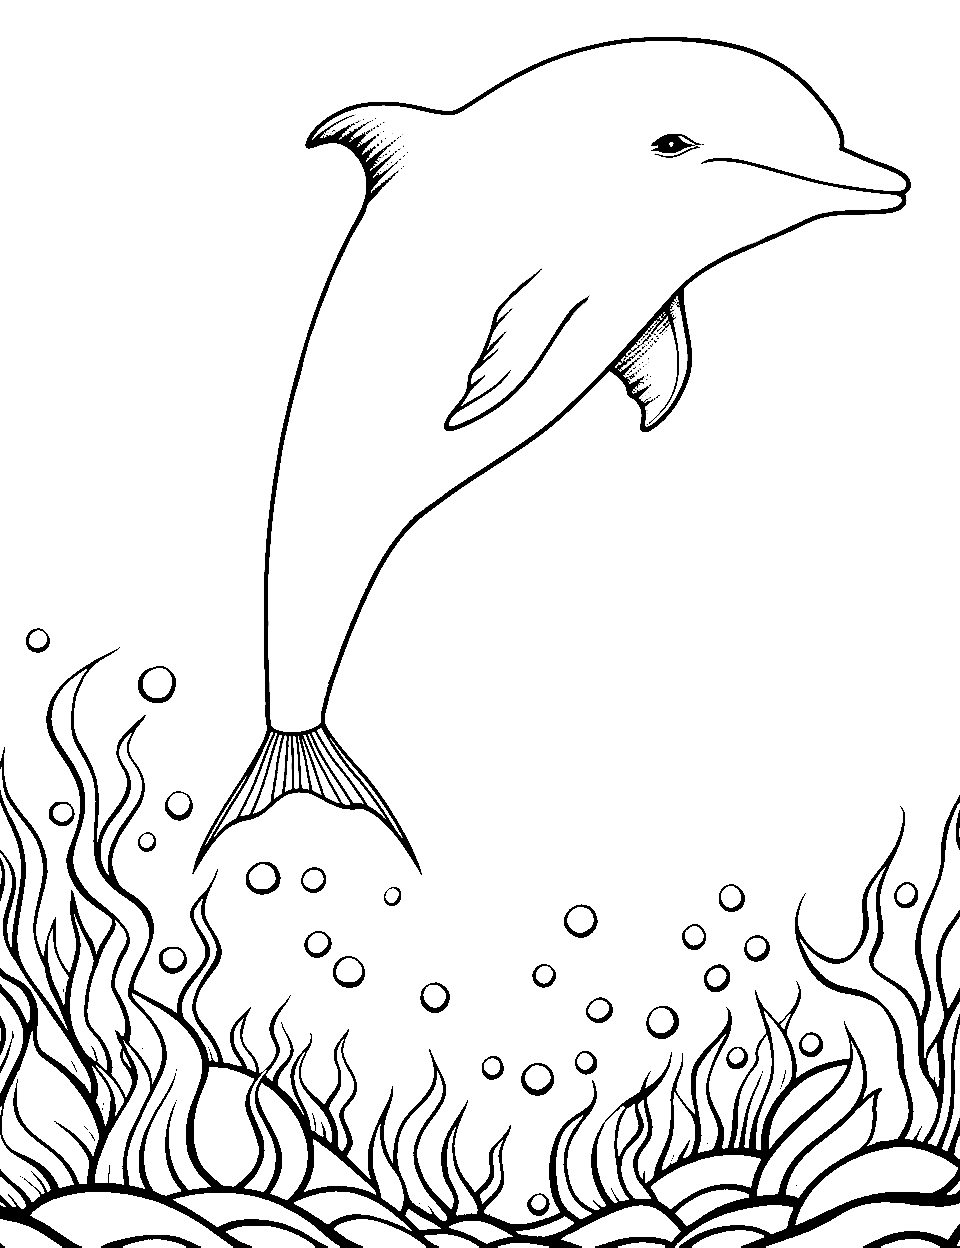 A Tale of a Dolphin Coloring Page - A dolphin with a unique tail, swimming near the ocean bottom floor with seaweeds around.